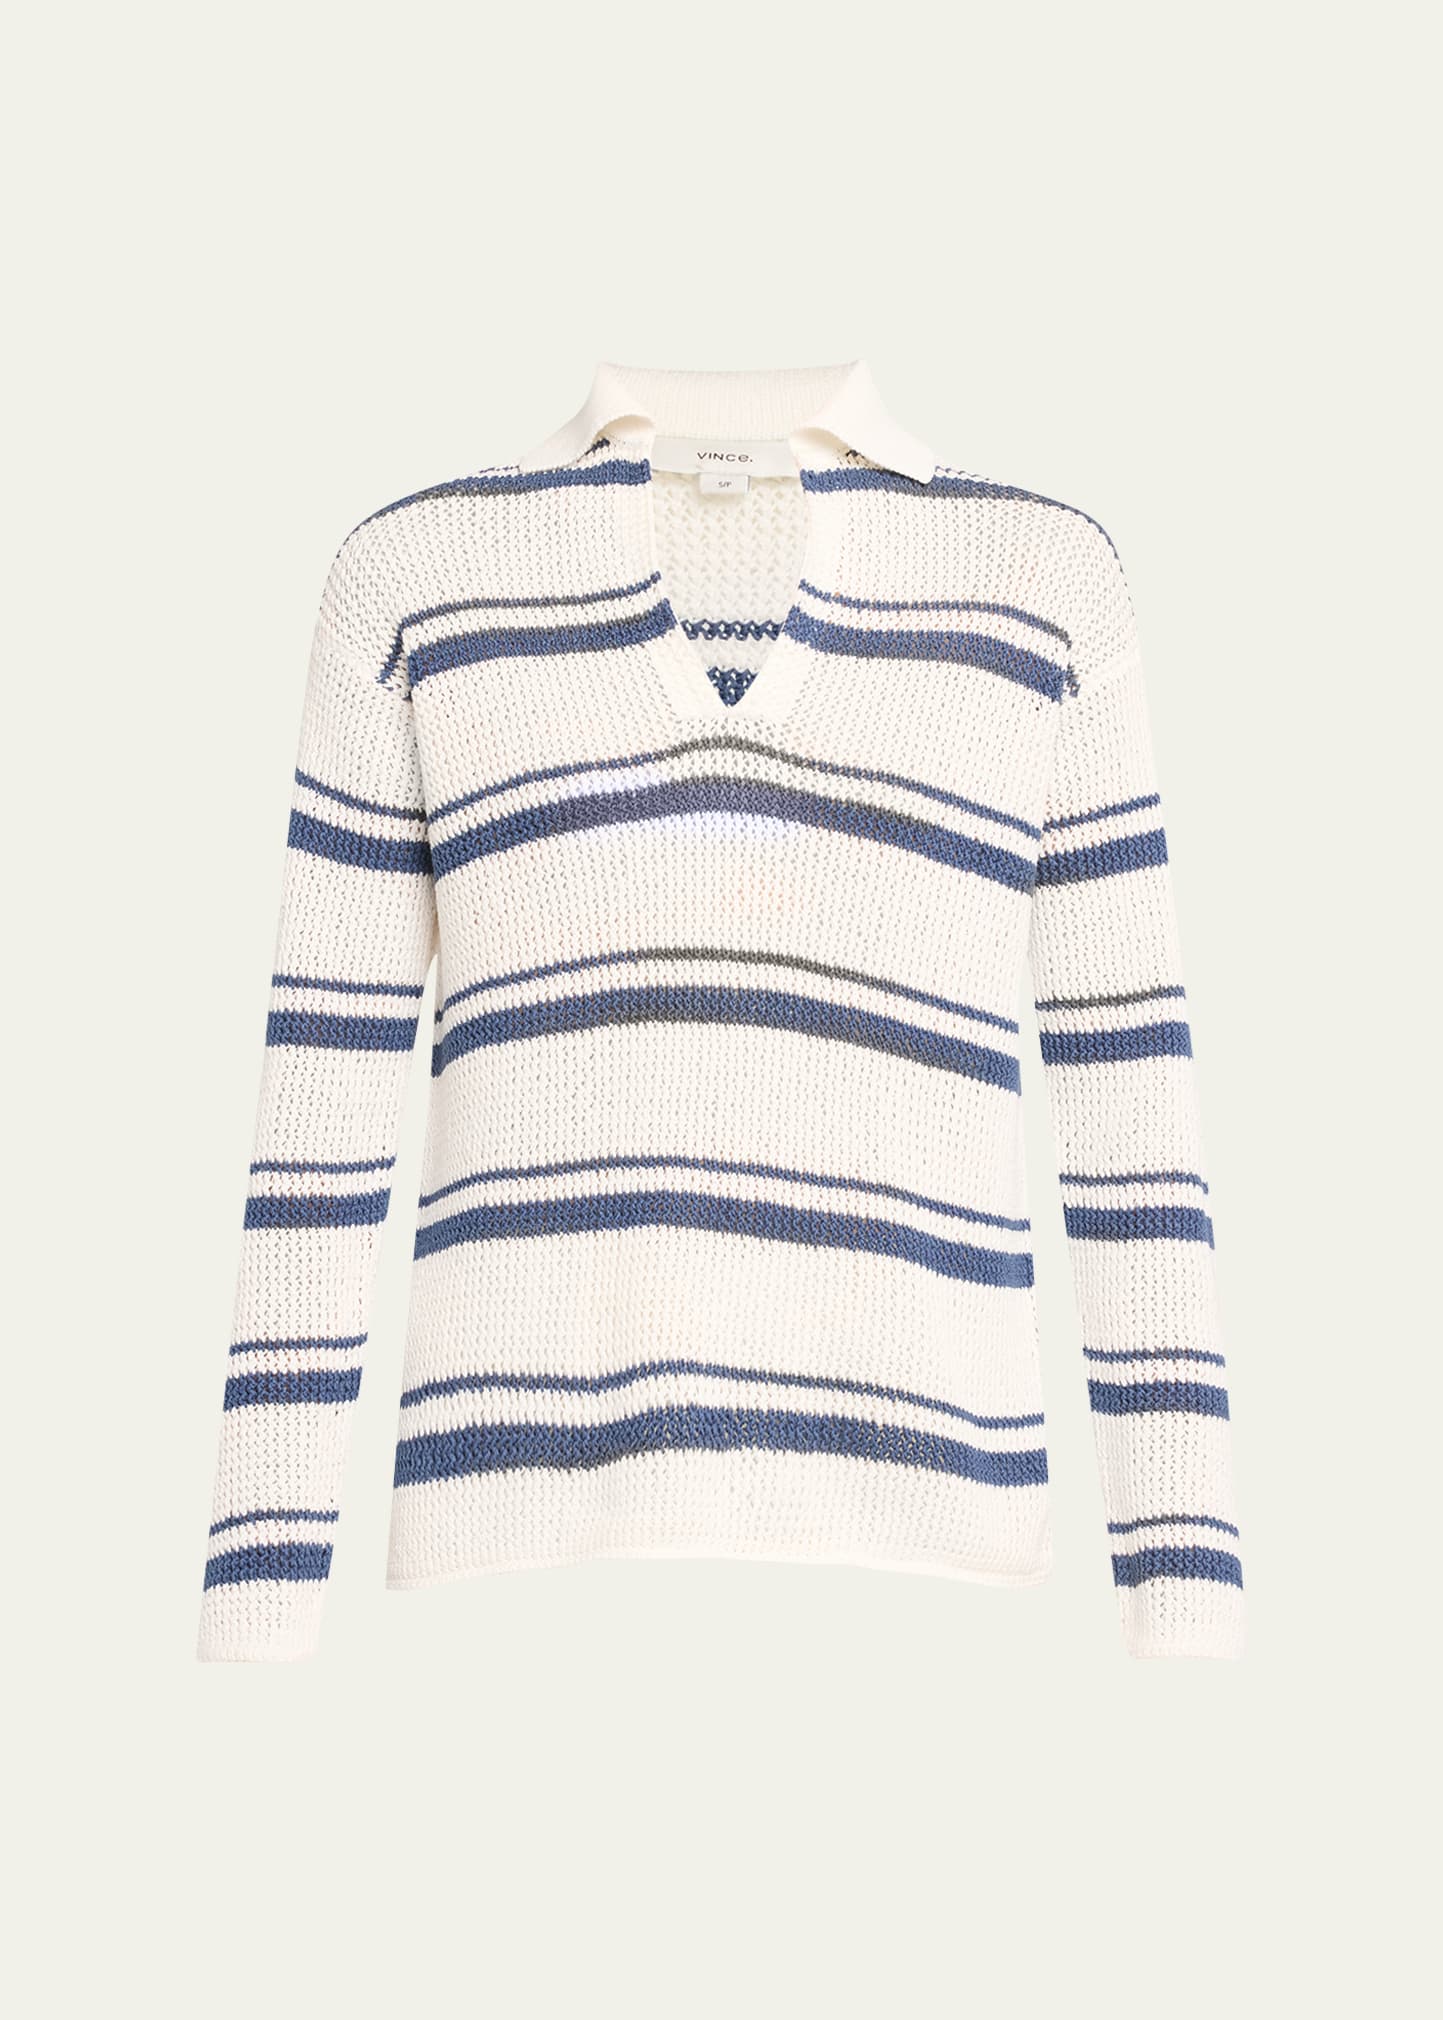 Racked Ribbed Stripe Pullover Sweater